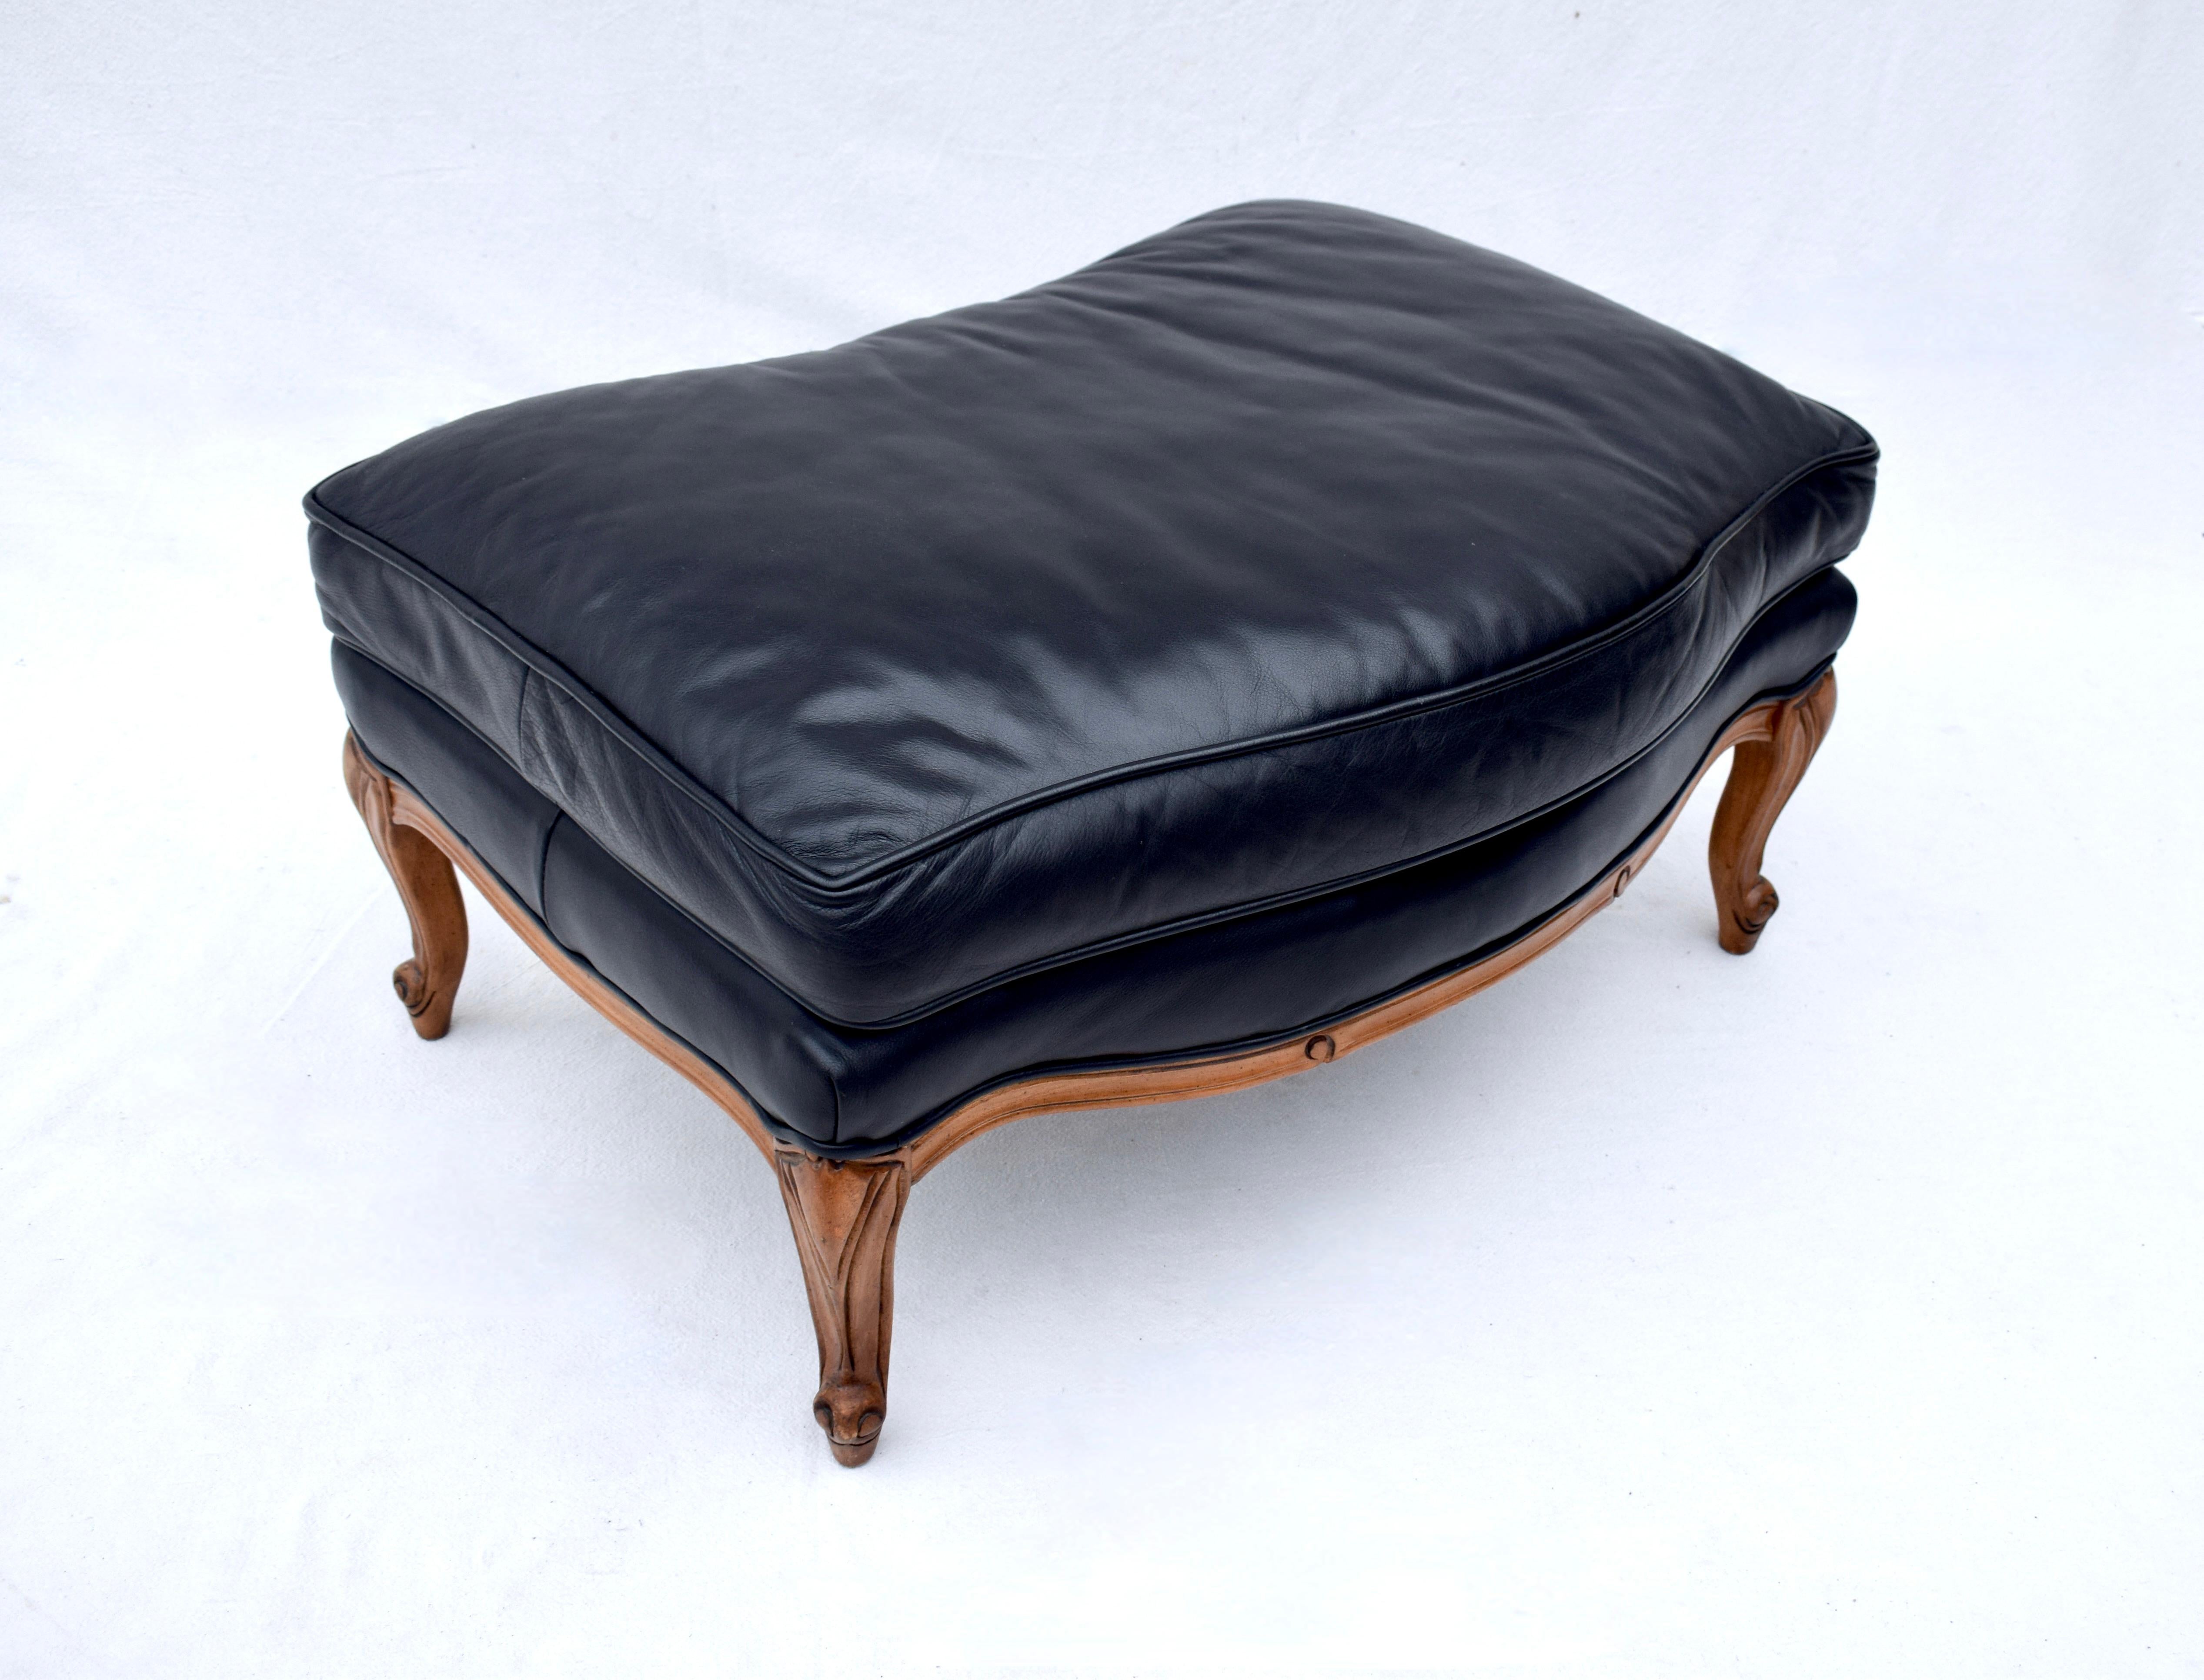 Woodward & Lothrop Top of the Line Black Leather and Walnut Club Chair & Ottoman 6